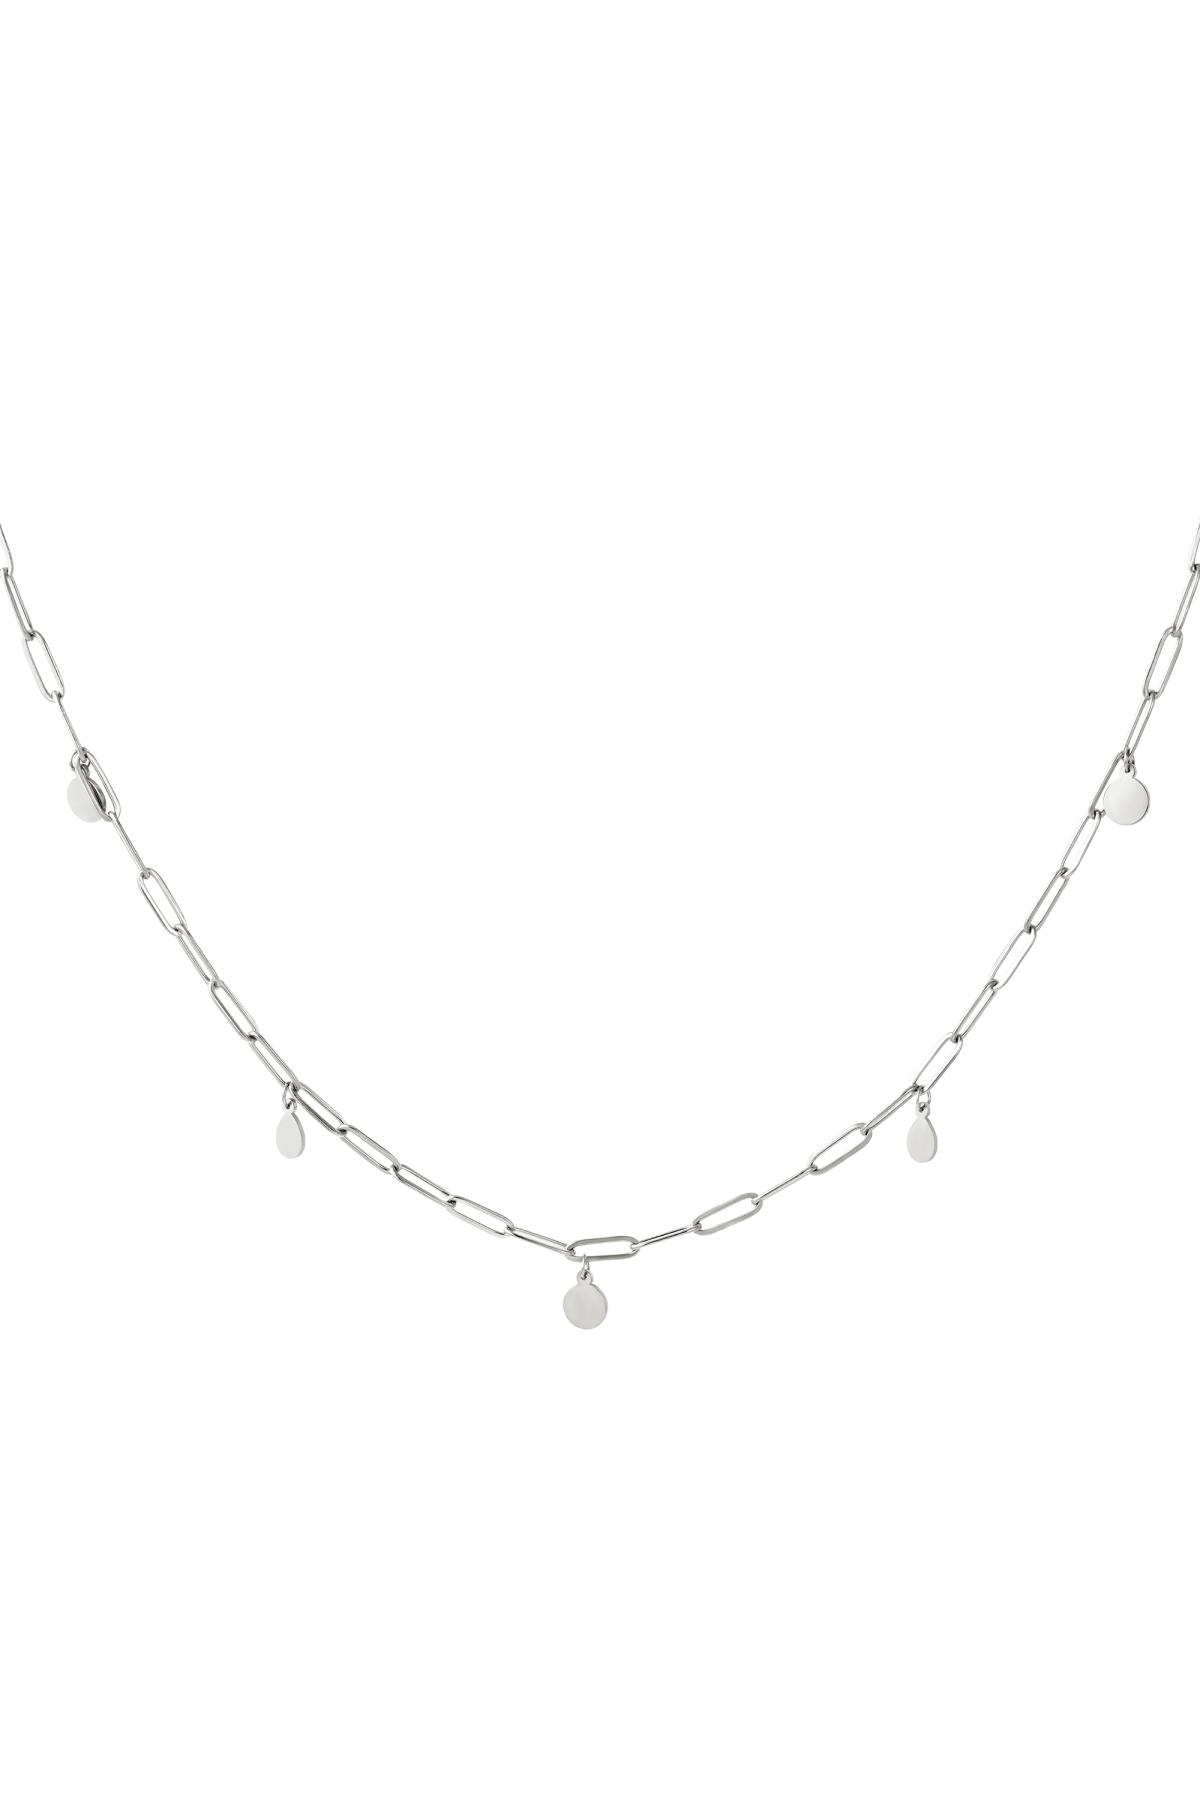 Stainless steel necklace confetti Silver 